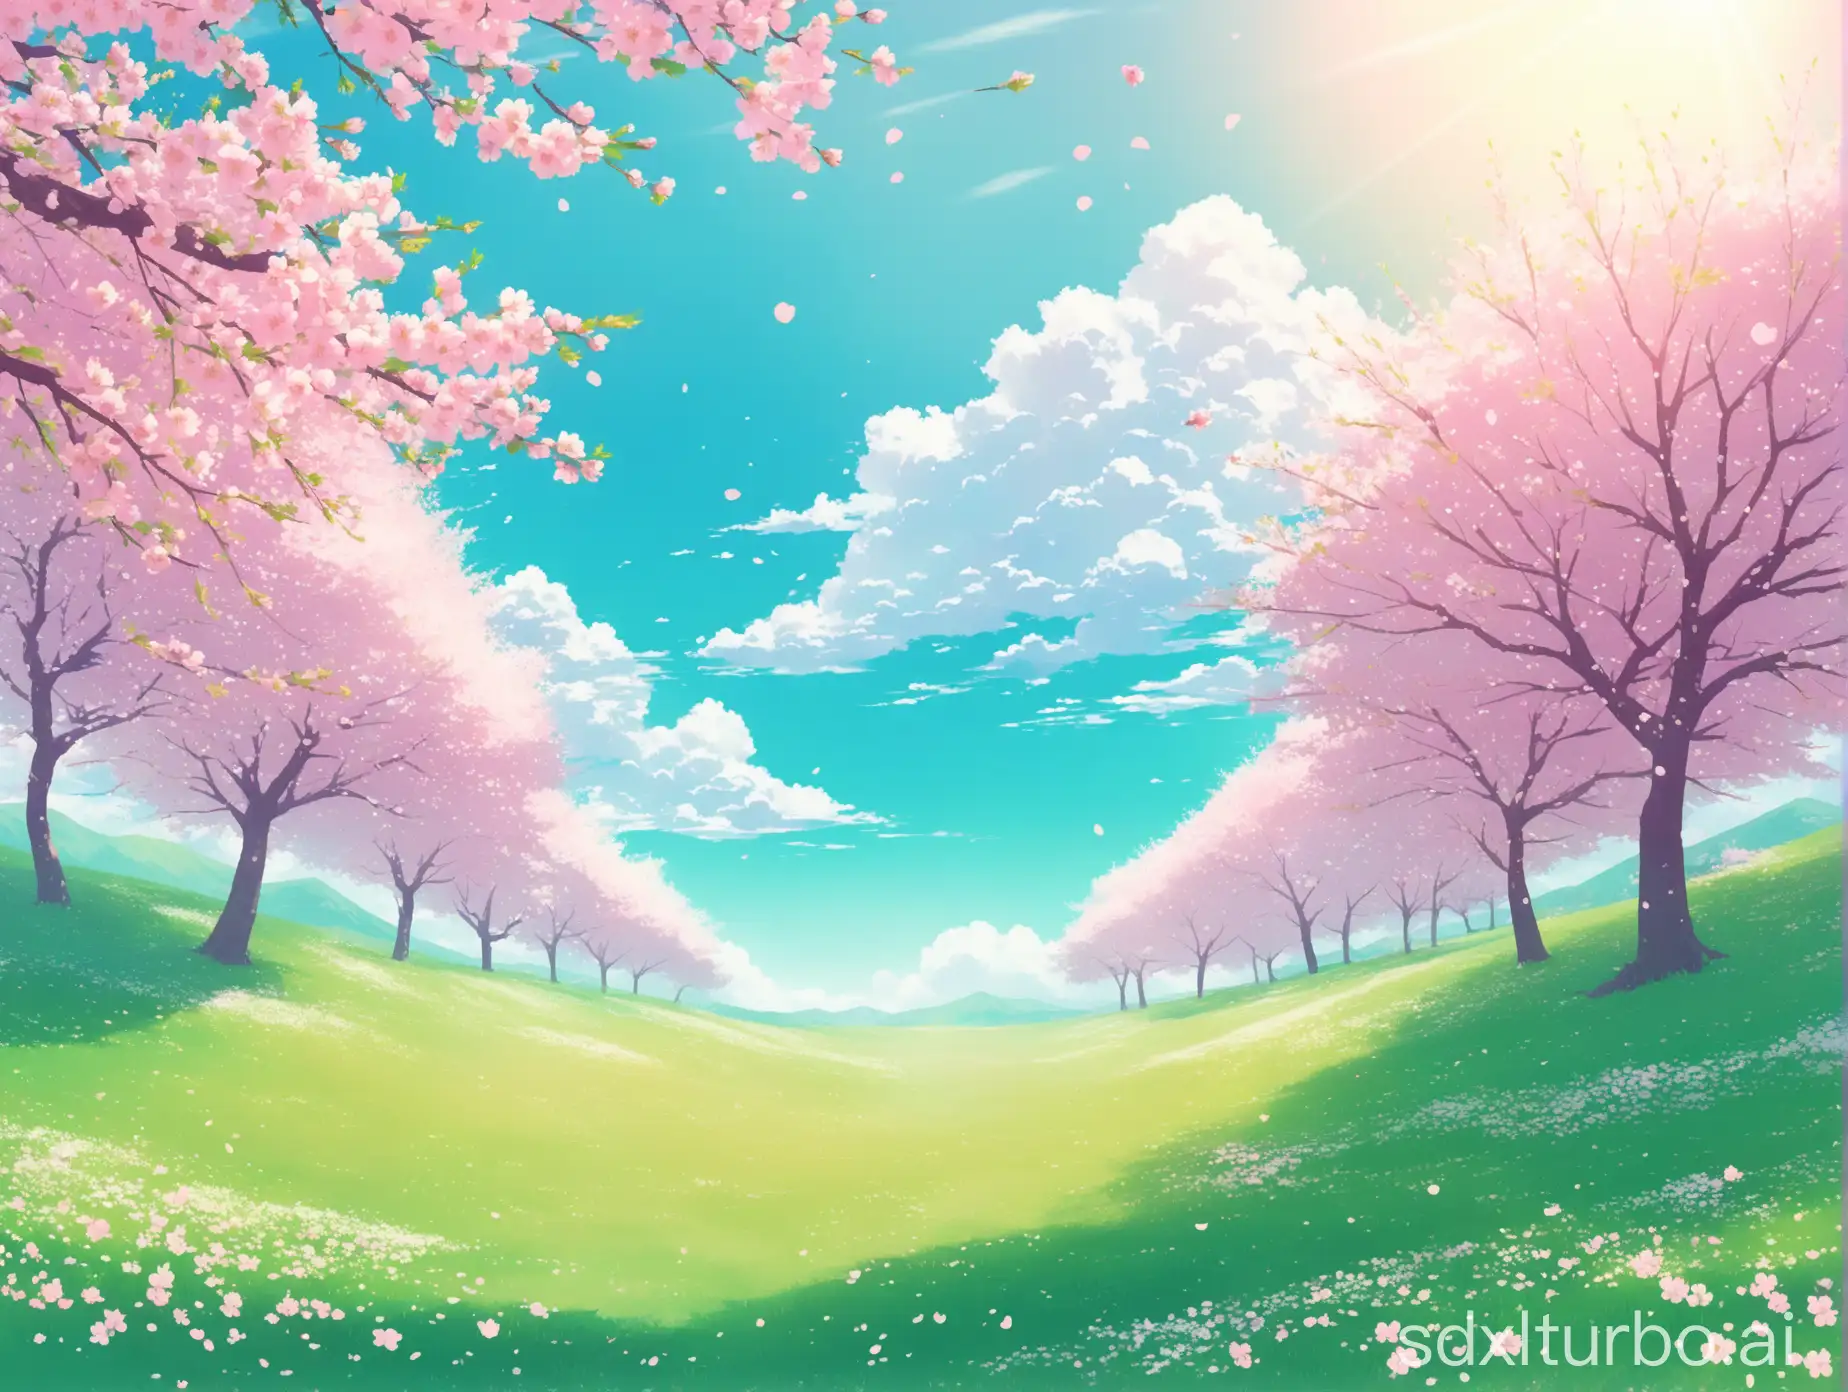 Springtime-Cherry-Blossom-Landscape-with-Anime-Style-and-Soft-Pastel-Colors